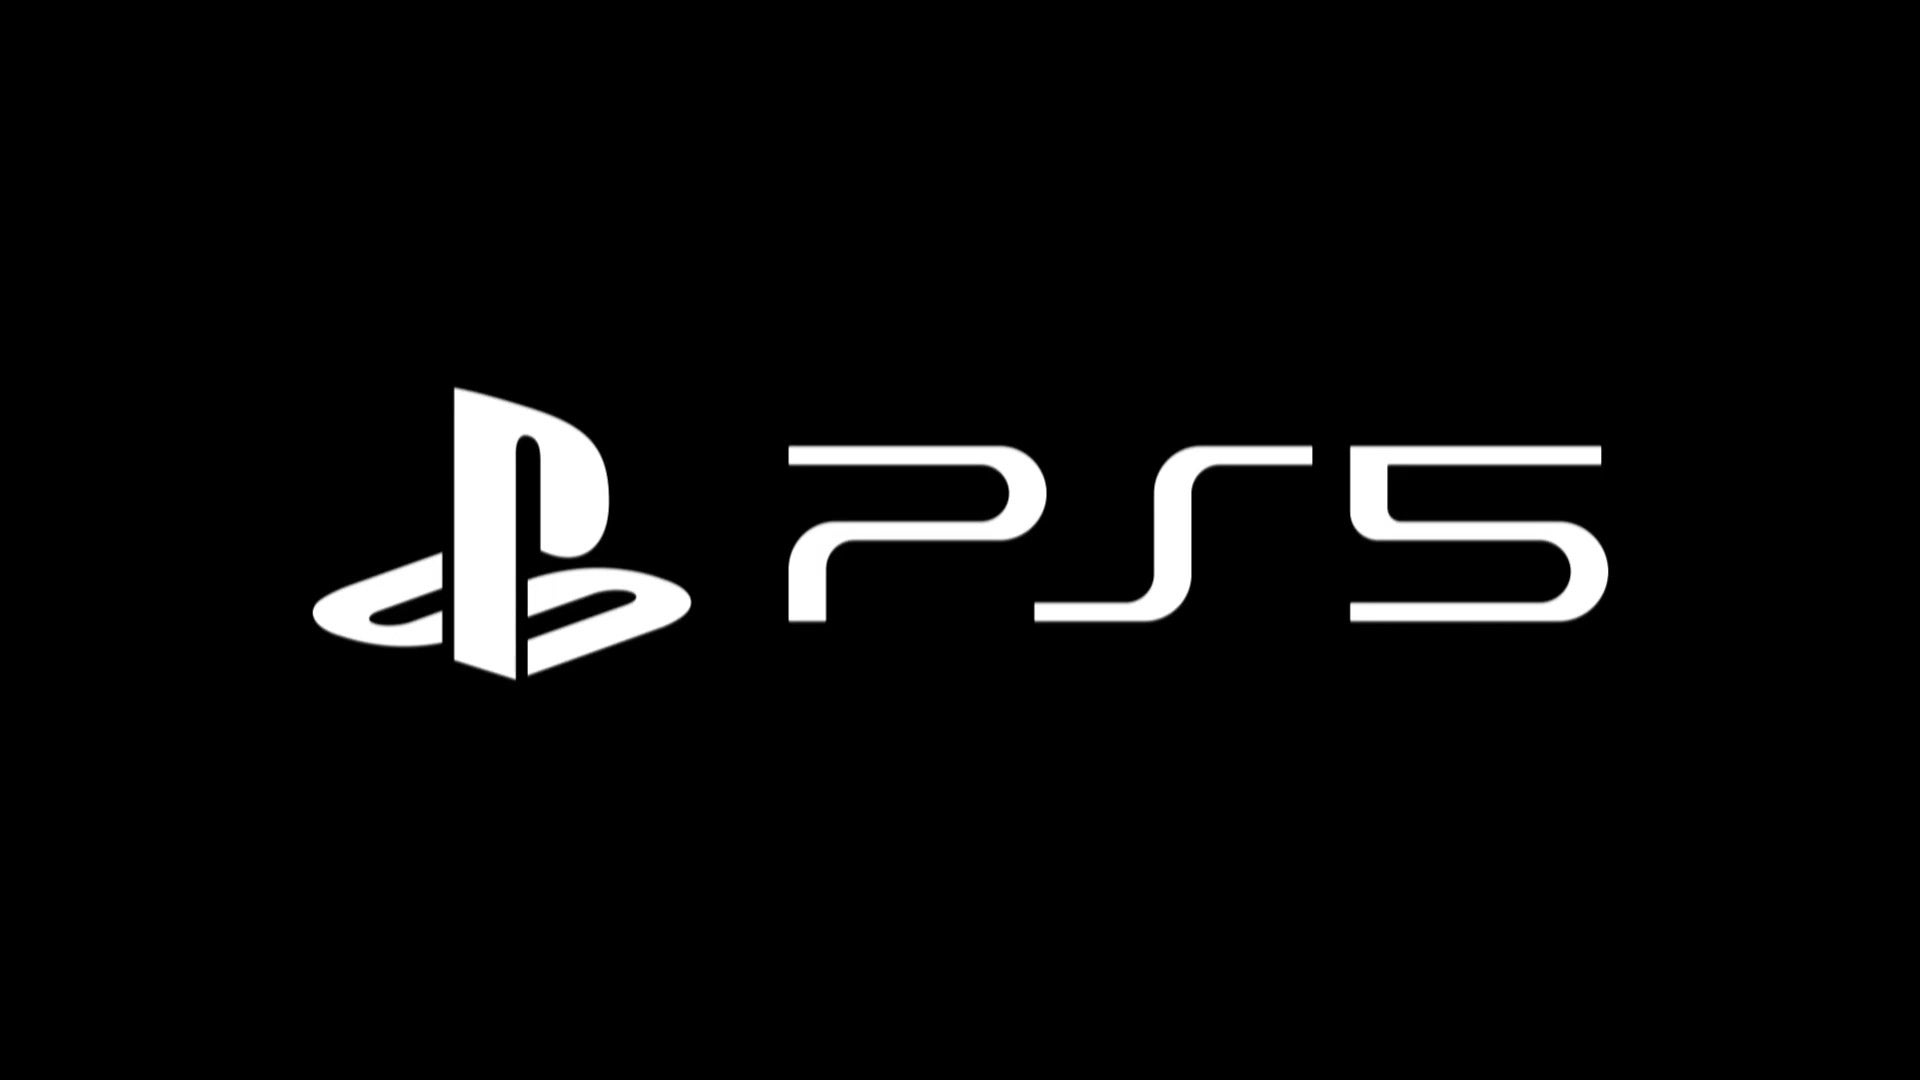 Image for Sony reveals the official PS5 logo during CES 2020